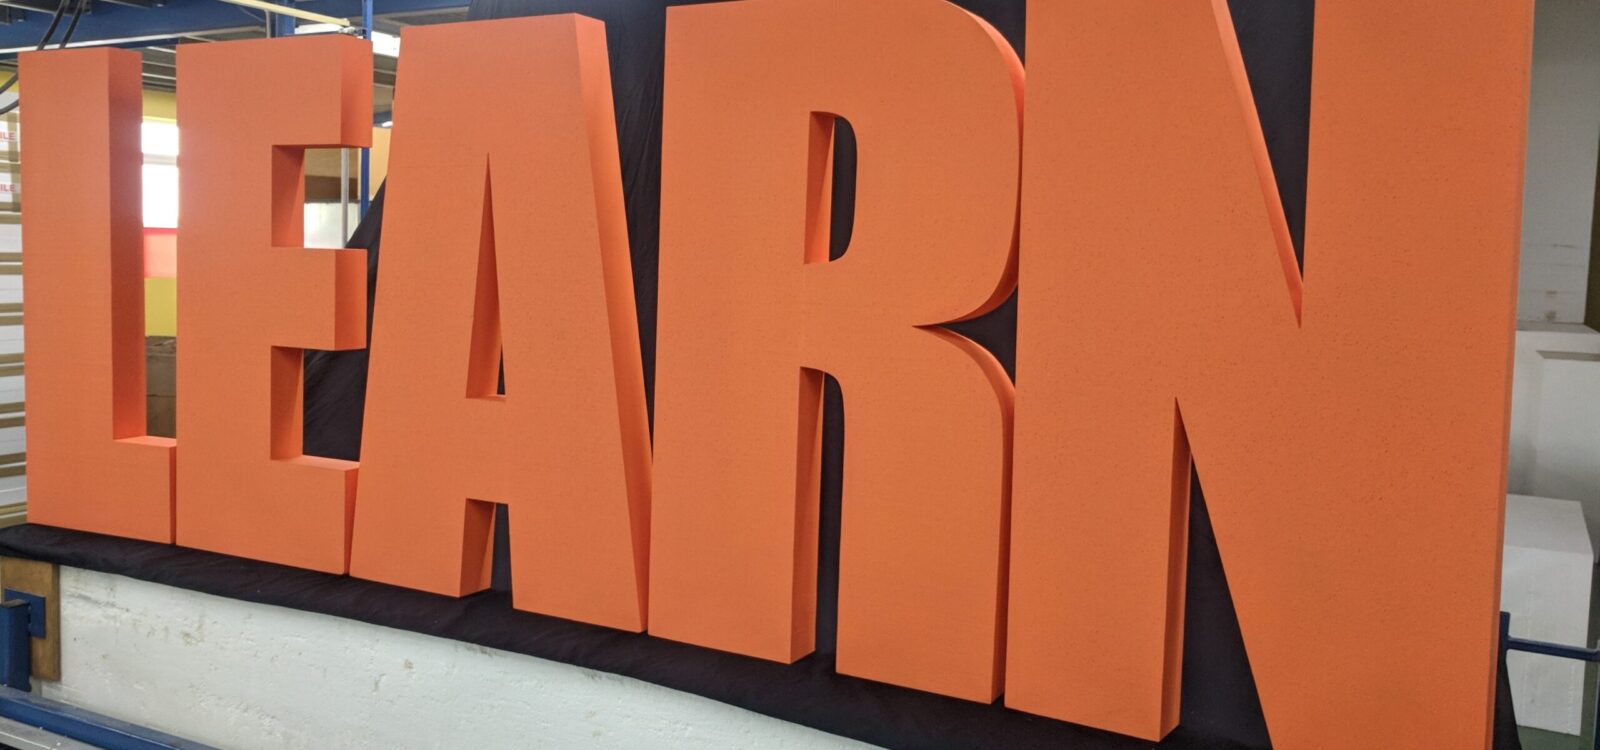 1.2m Polystyrene Learn Letters Painted Orange For A School